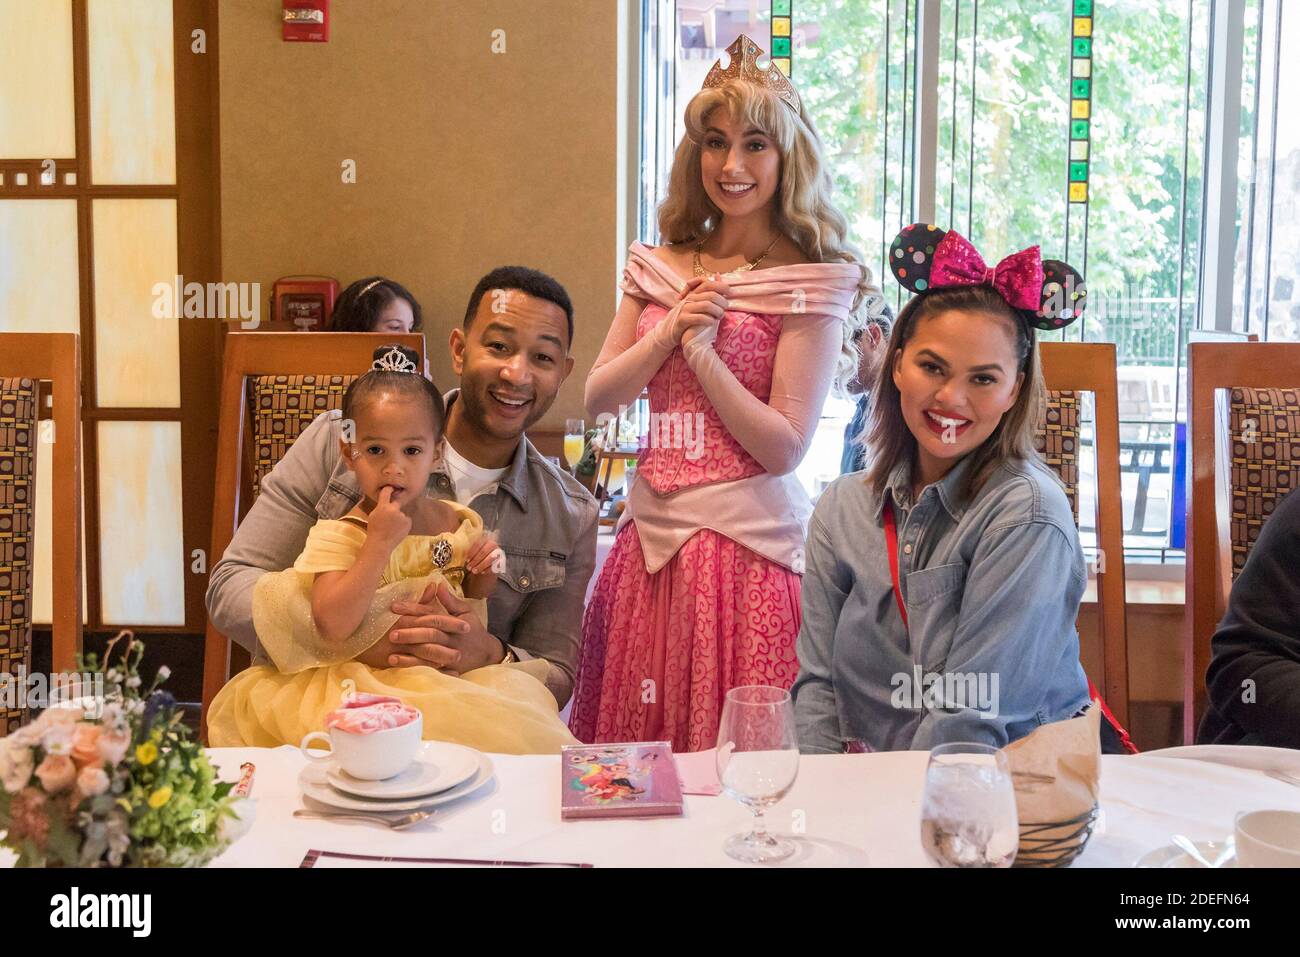 Hand Out Photo - John Legend, Chrissy Teigen and their daughter Luna pose with Princess Aurora during the new Disney Princess Breakfast Adventures at Disney’s Grand Californian Hotel in Anaheim, CA, USA on April 12, 2019. Photo by Joshua Sudock/Disneyland via ABACAPRESS.COM Stock Photo